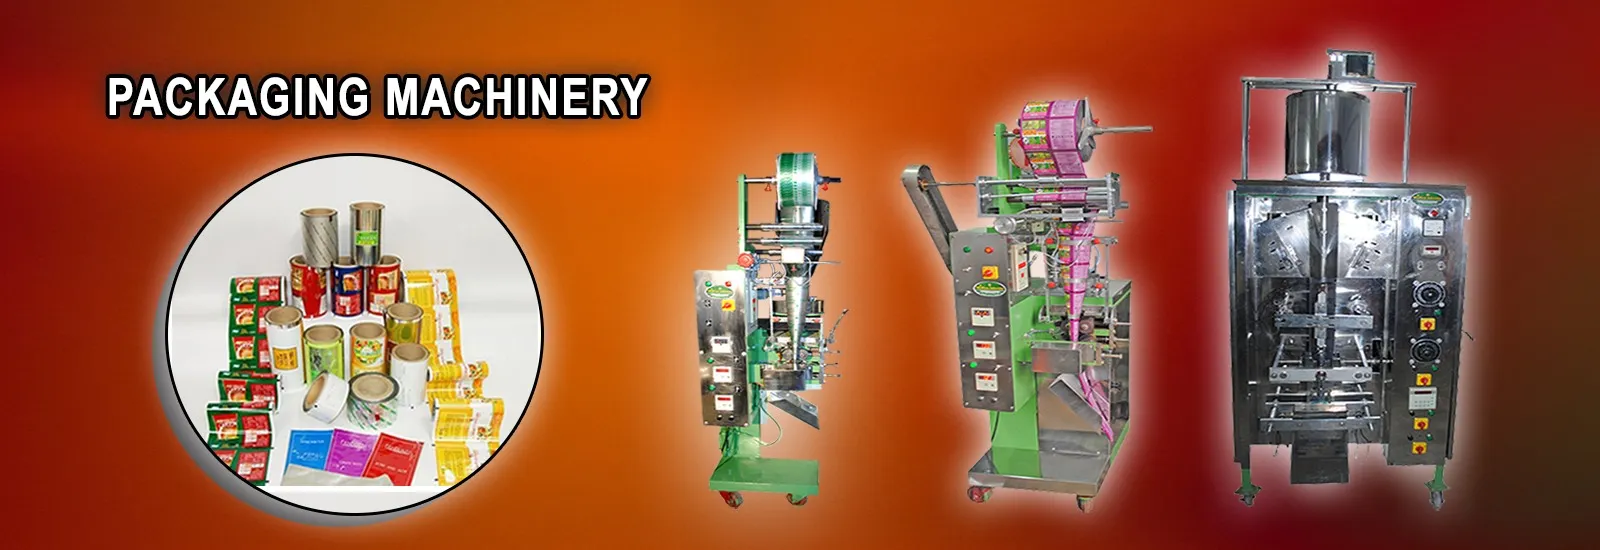 Packaging Machinery, Packaging Machinery Manufacturer